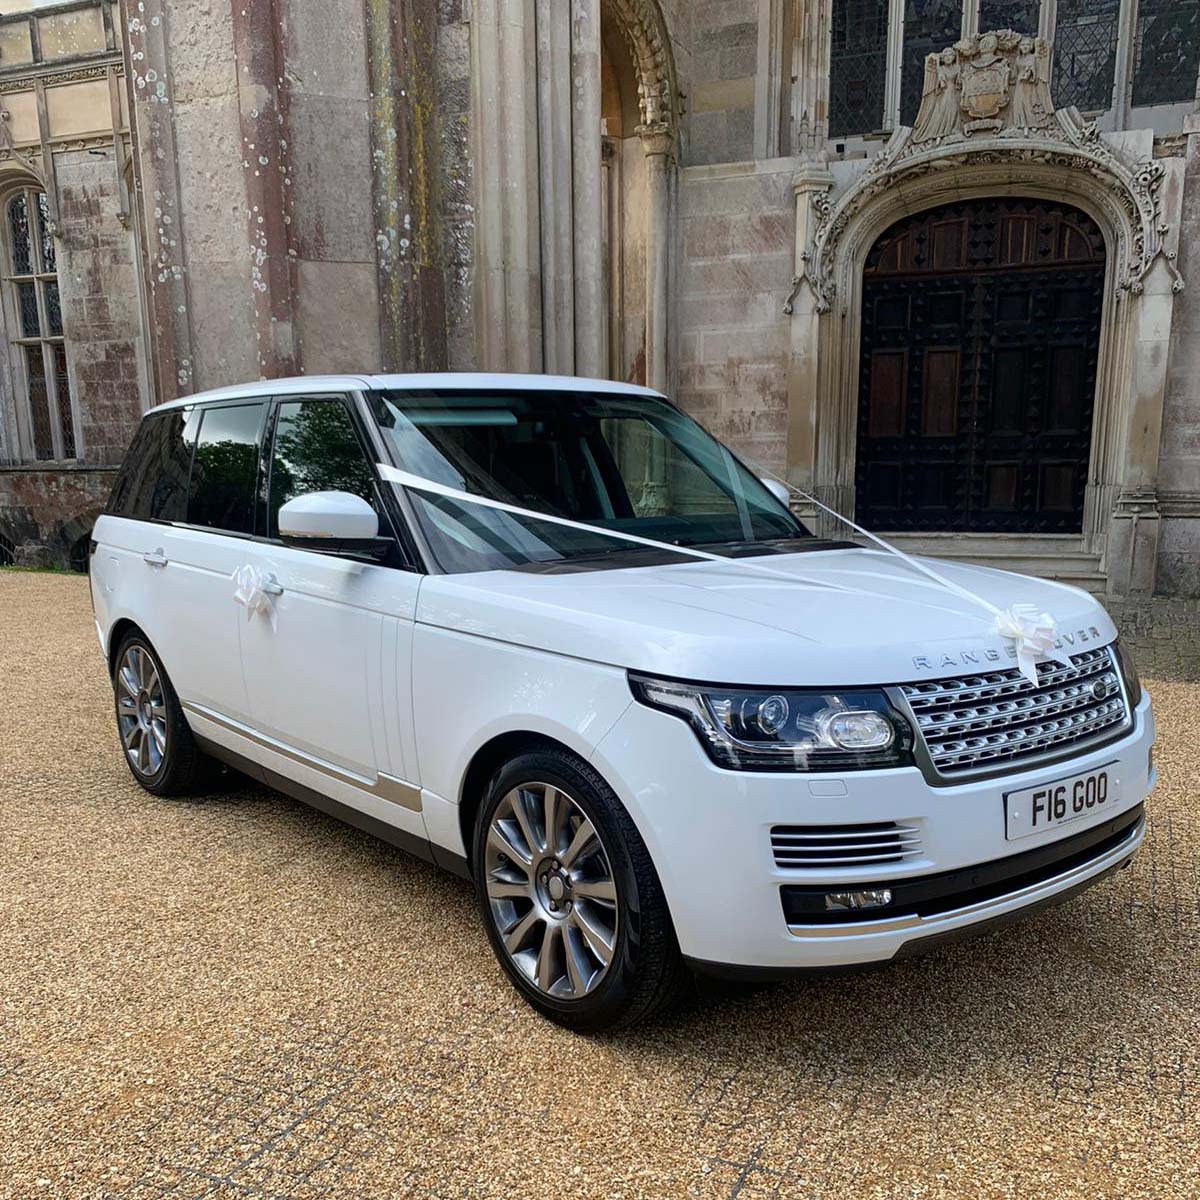 White Range Rover dressed with traditional white wedding ribbons.